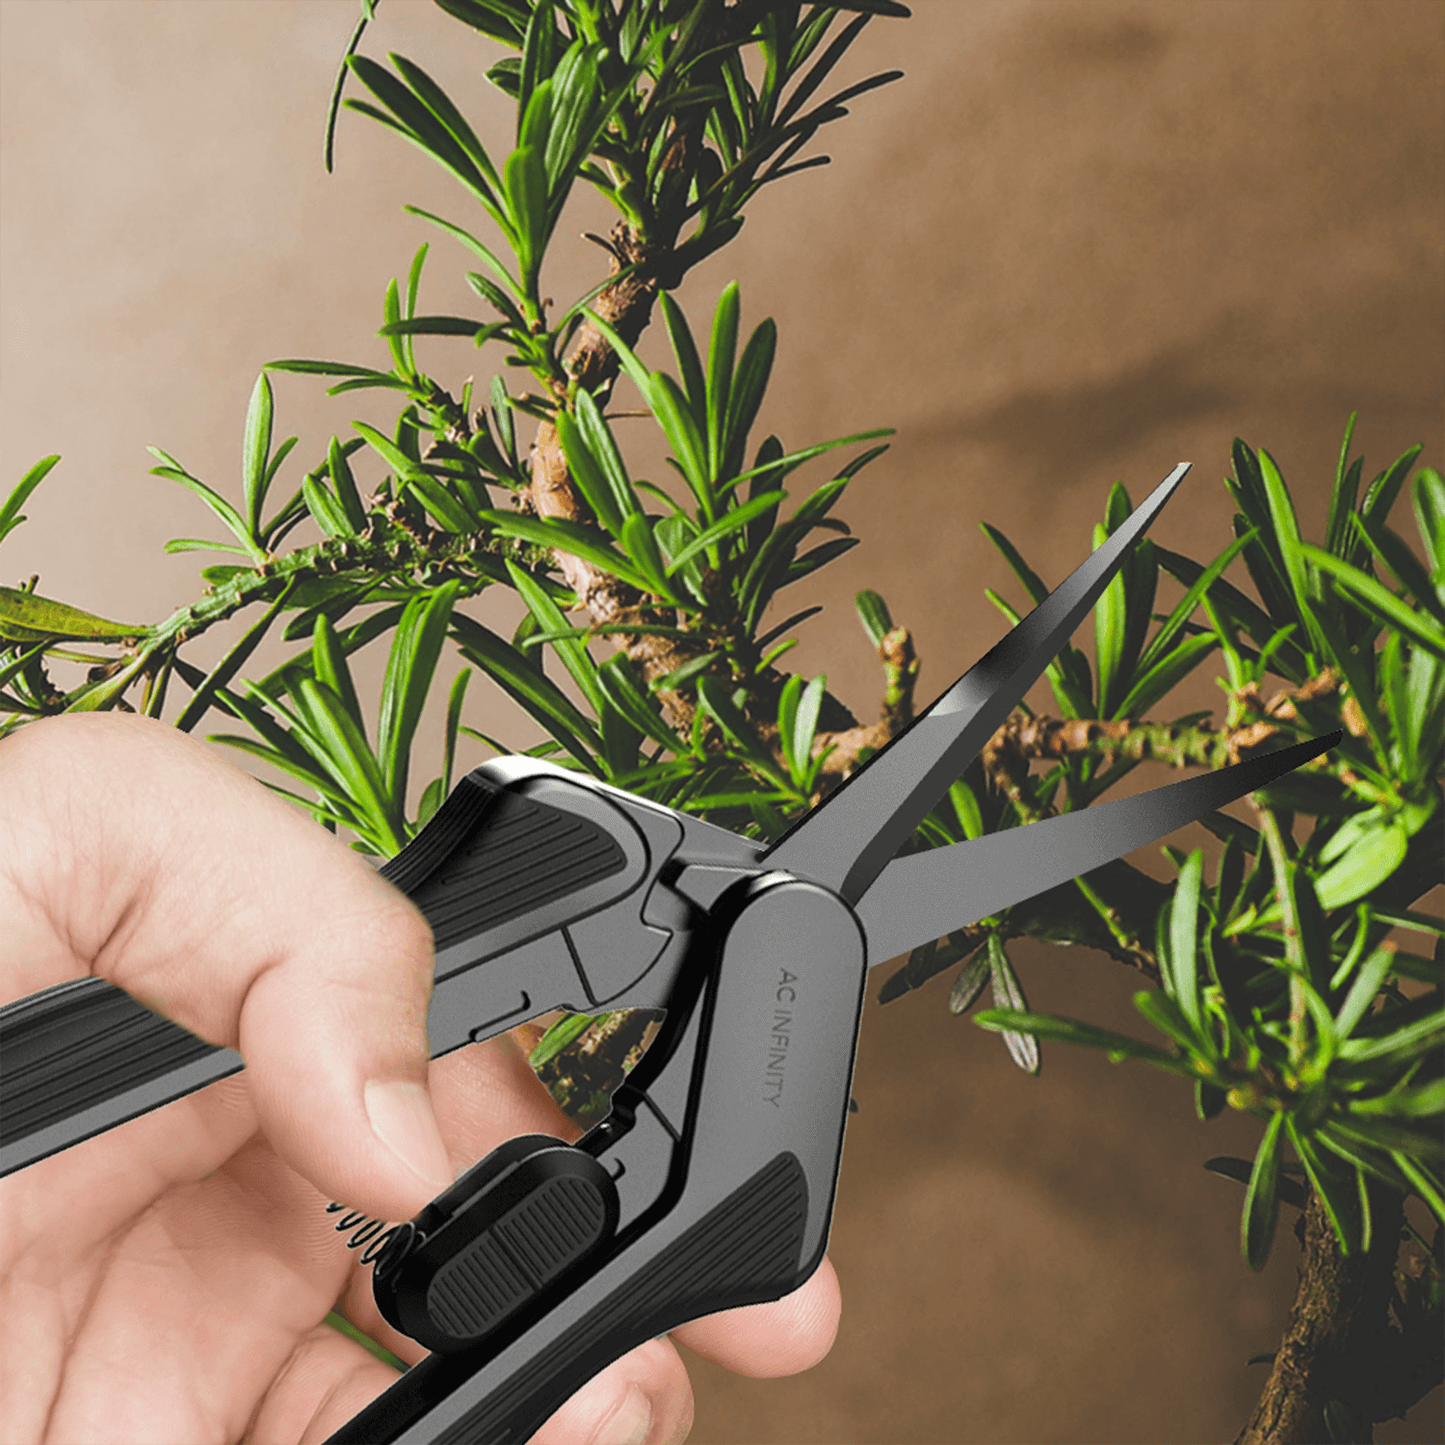 AC Infinity Stainless Steel Curved Pruning Shear, Ergonomic Lightweight, 6.6" Blades AC-PSC3 Harvest & Extraction